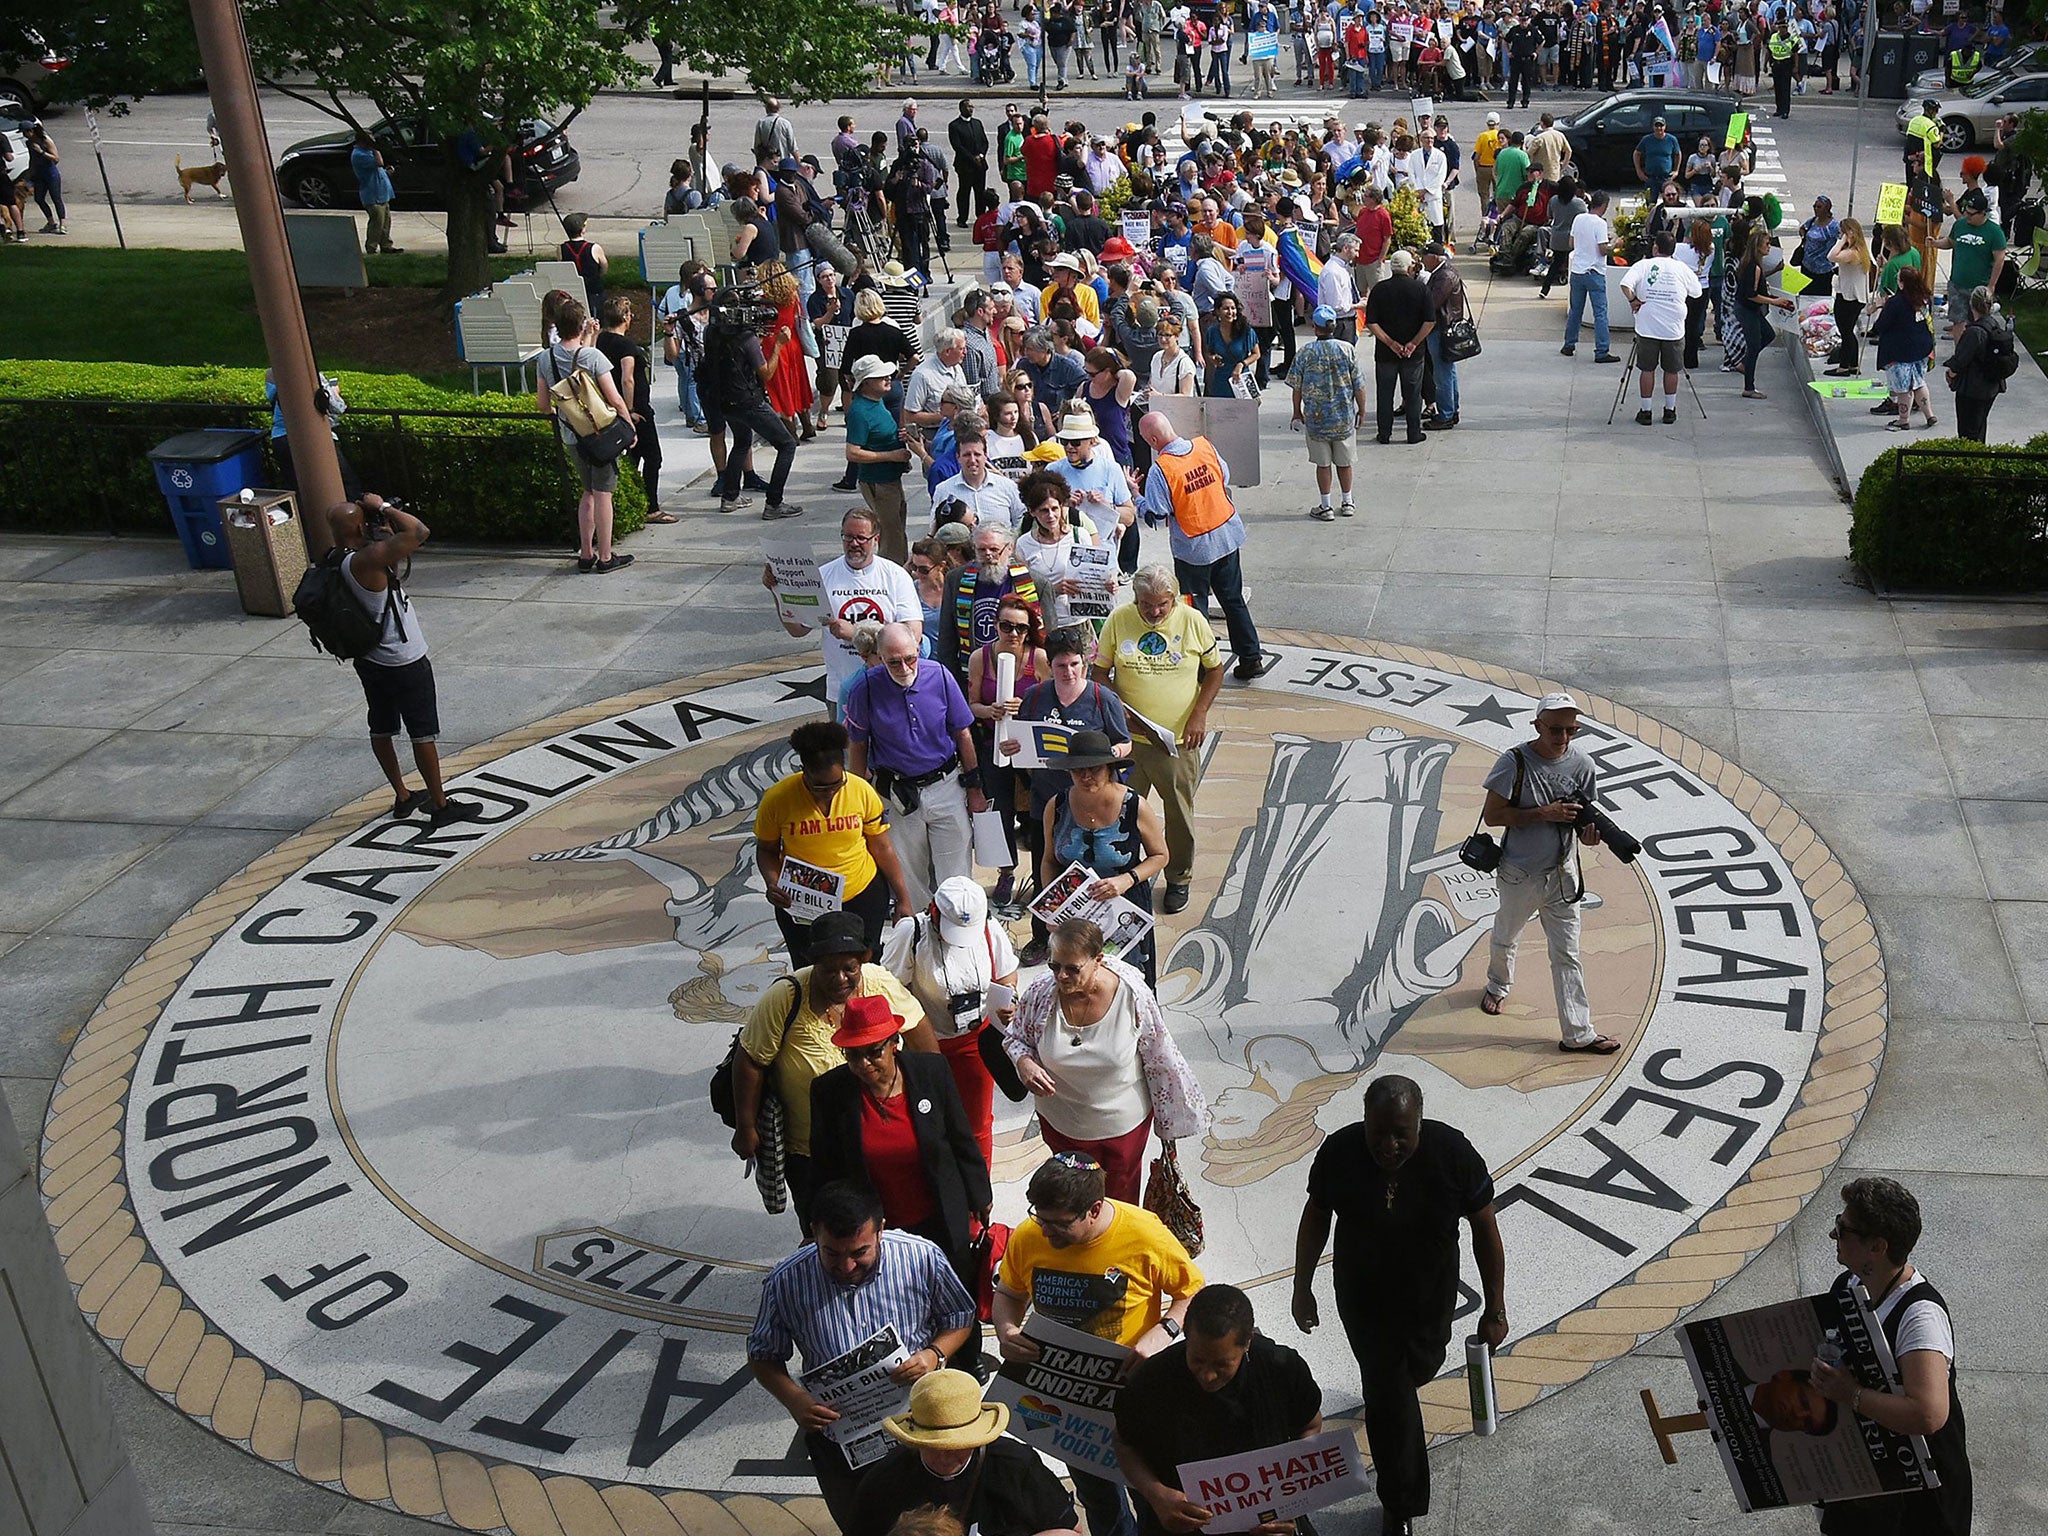 Opponents of North Carolina's HB2 walk over the state seal as they enter the legislative building for a sit-in protest in Raleigh